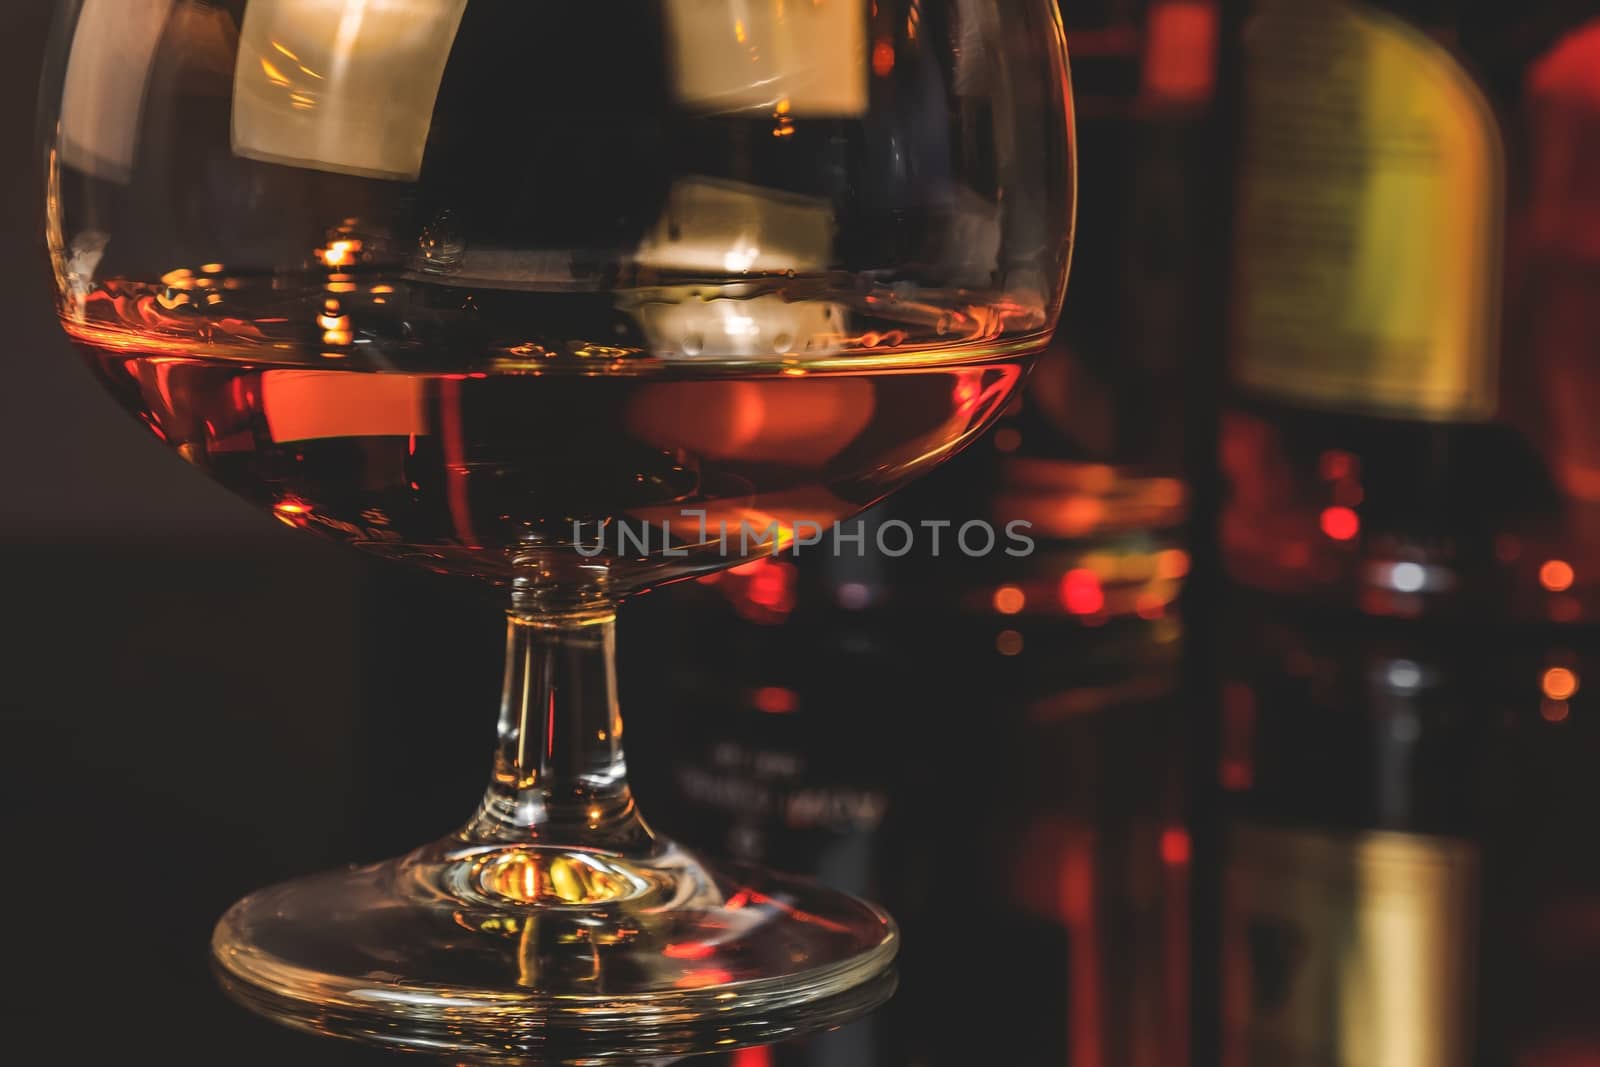 snifter of brandy in elegant typical cognac glass  in front of bottles in background, warm atmosphere